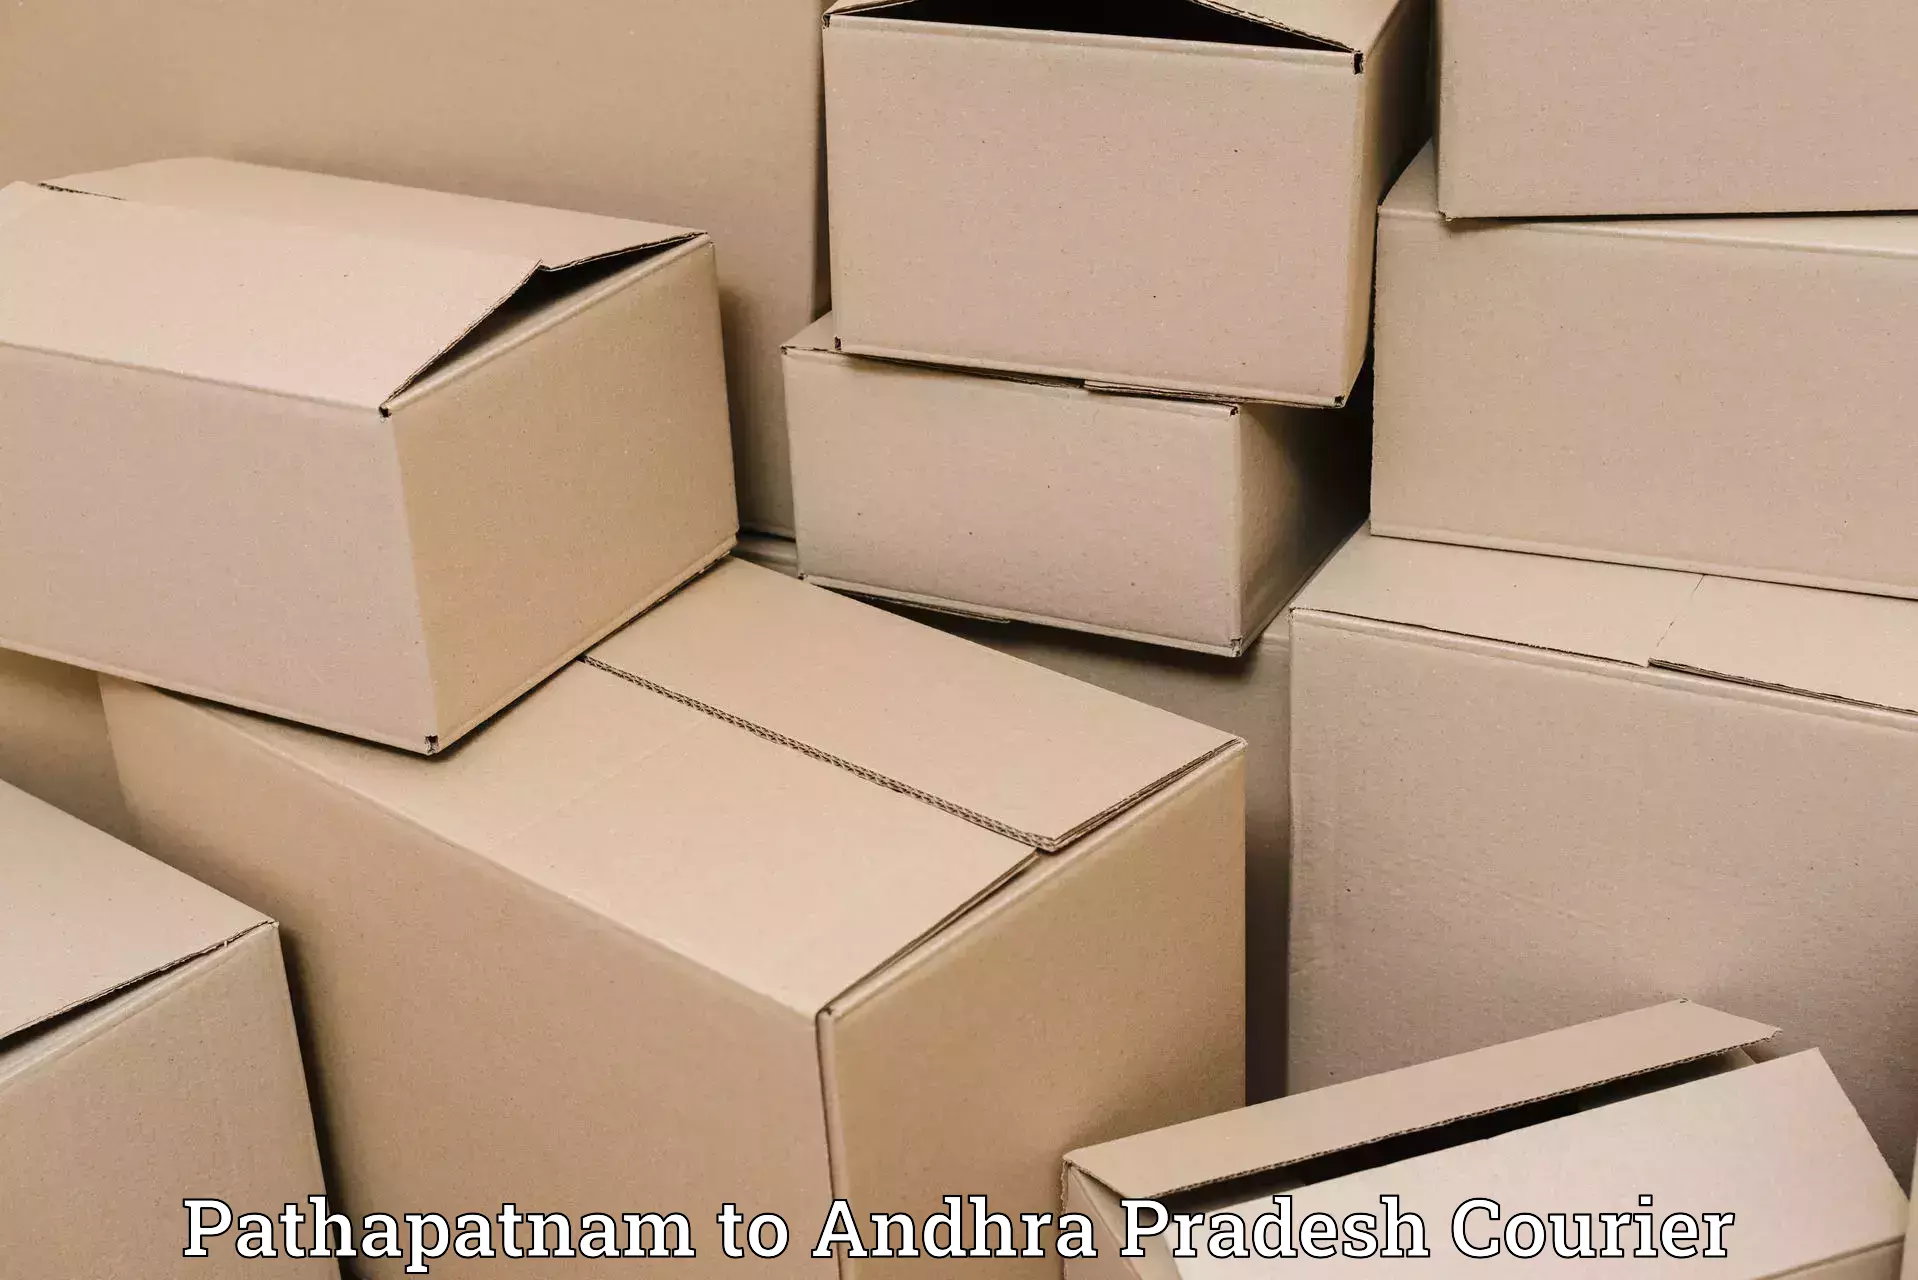 Flexible delivery schedules Pathapatnam to Visakhapatnam Port